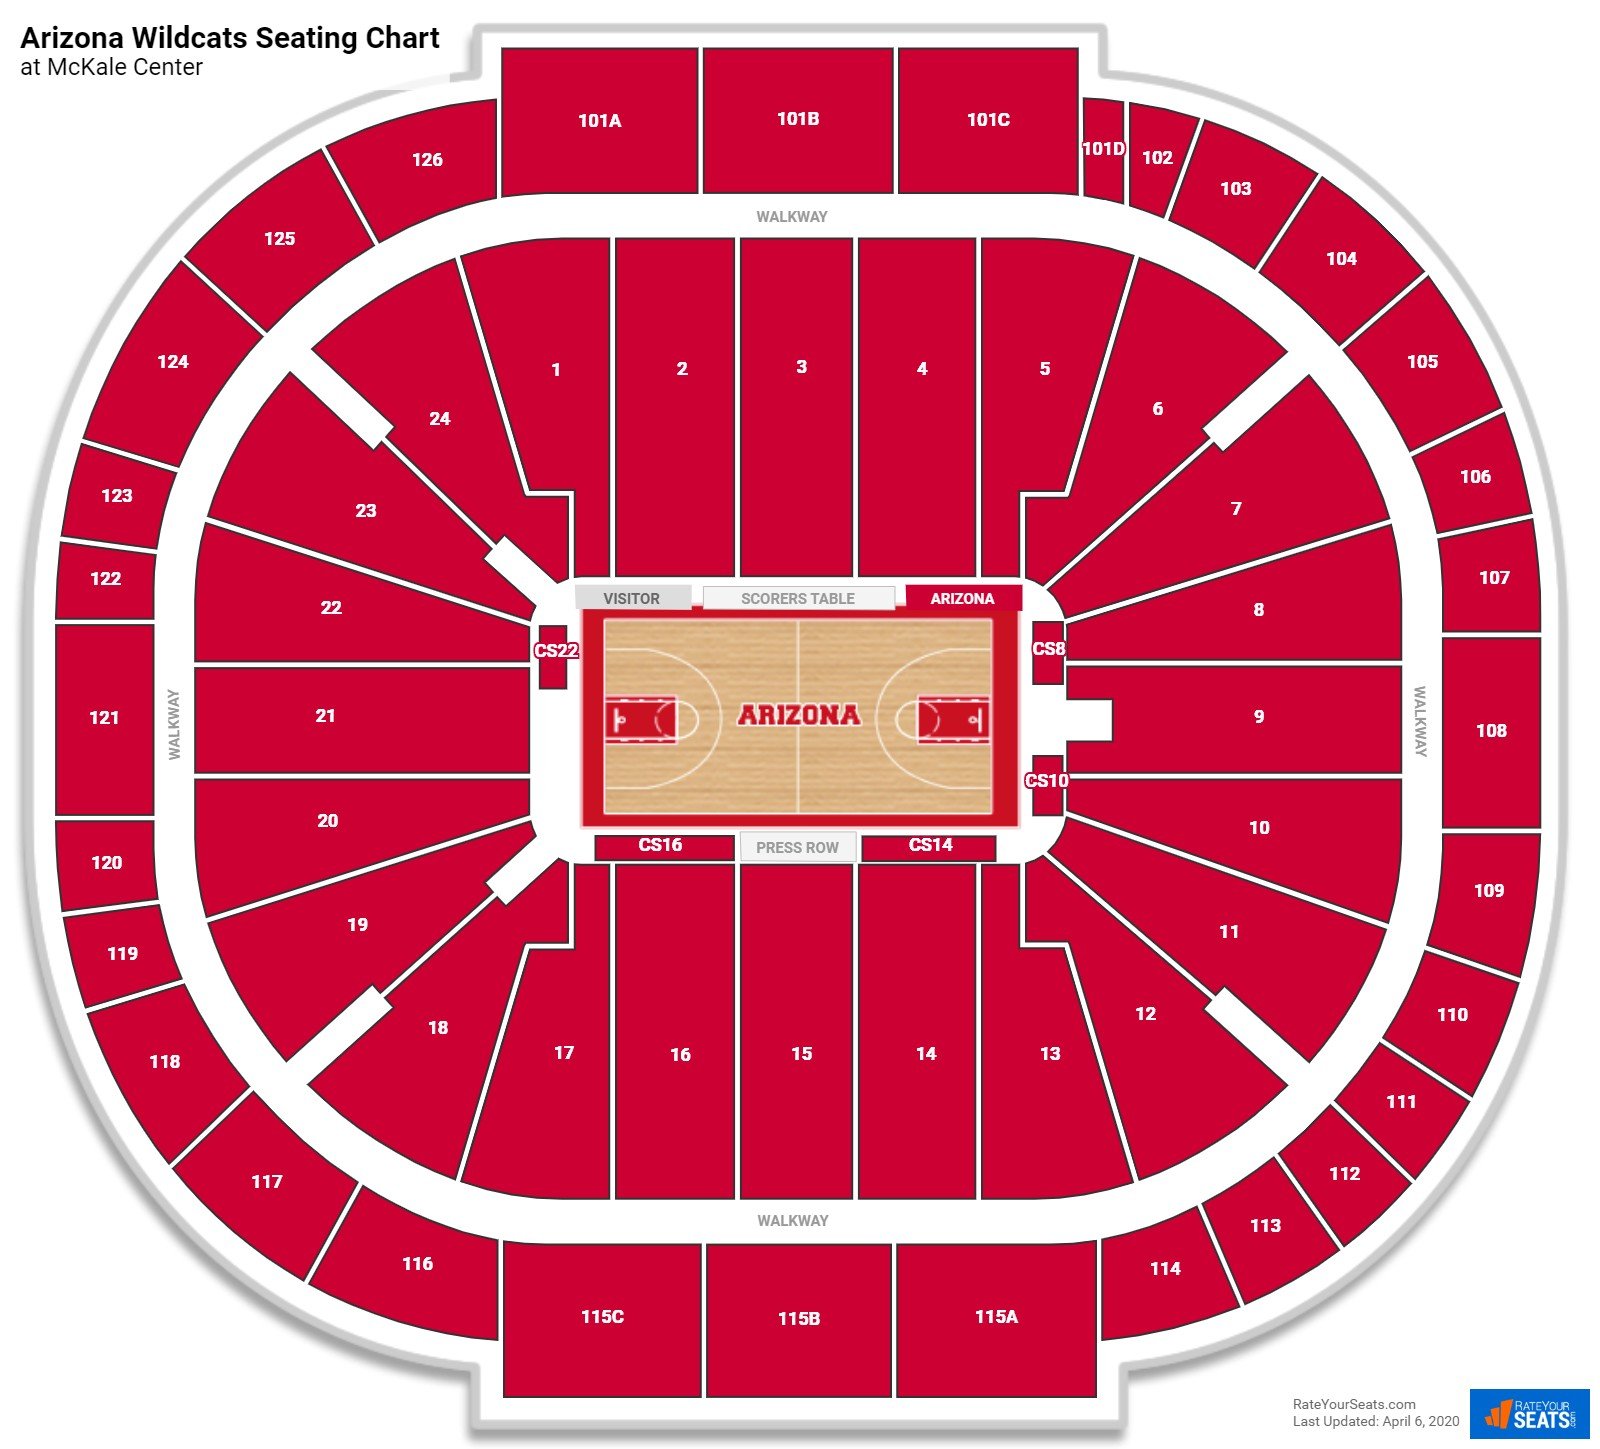 McKale Center Seating Charts - RateYourSeats.com